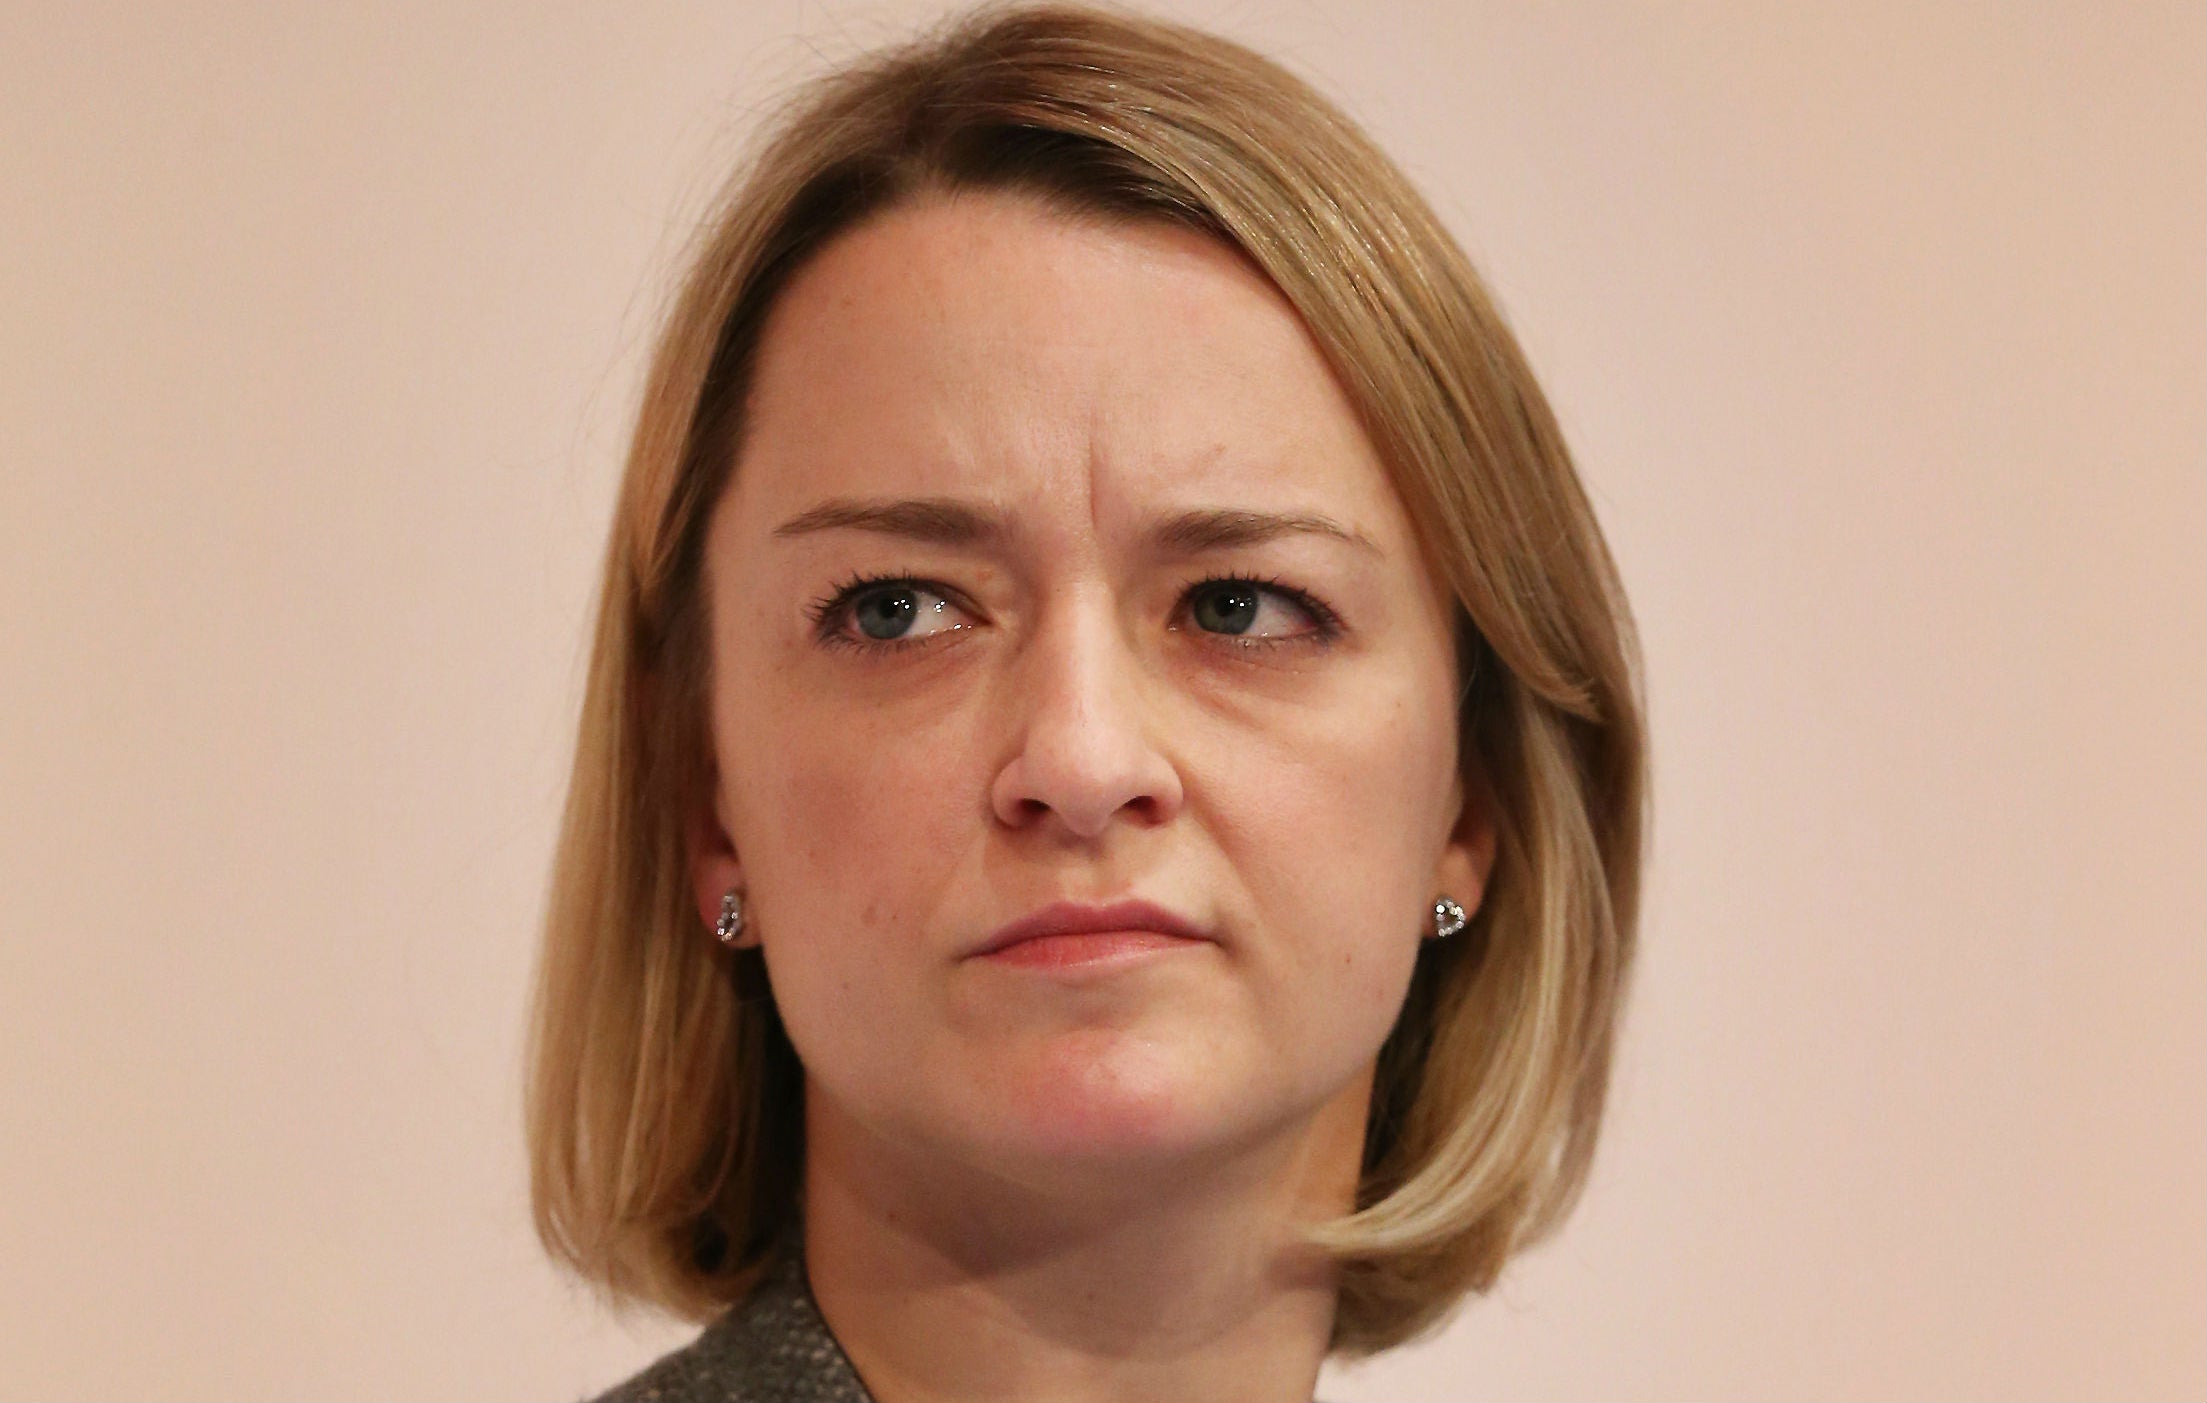 Laura Kuenssberg has frequently been targeted by online trolls